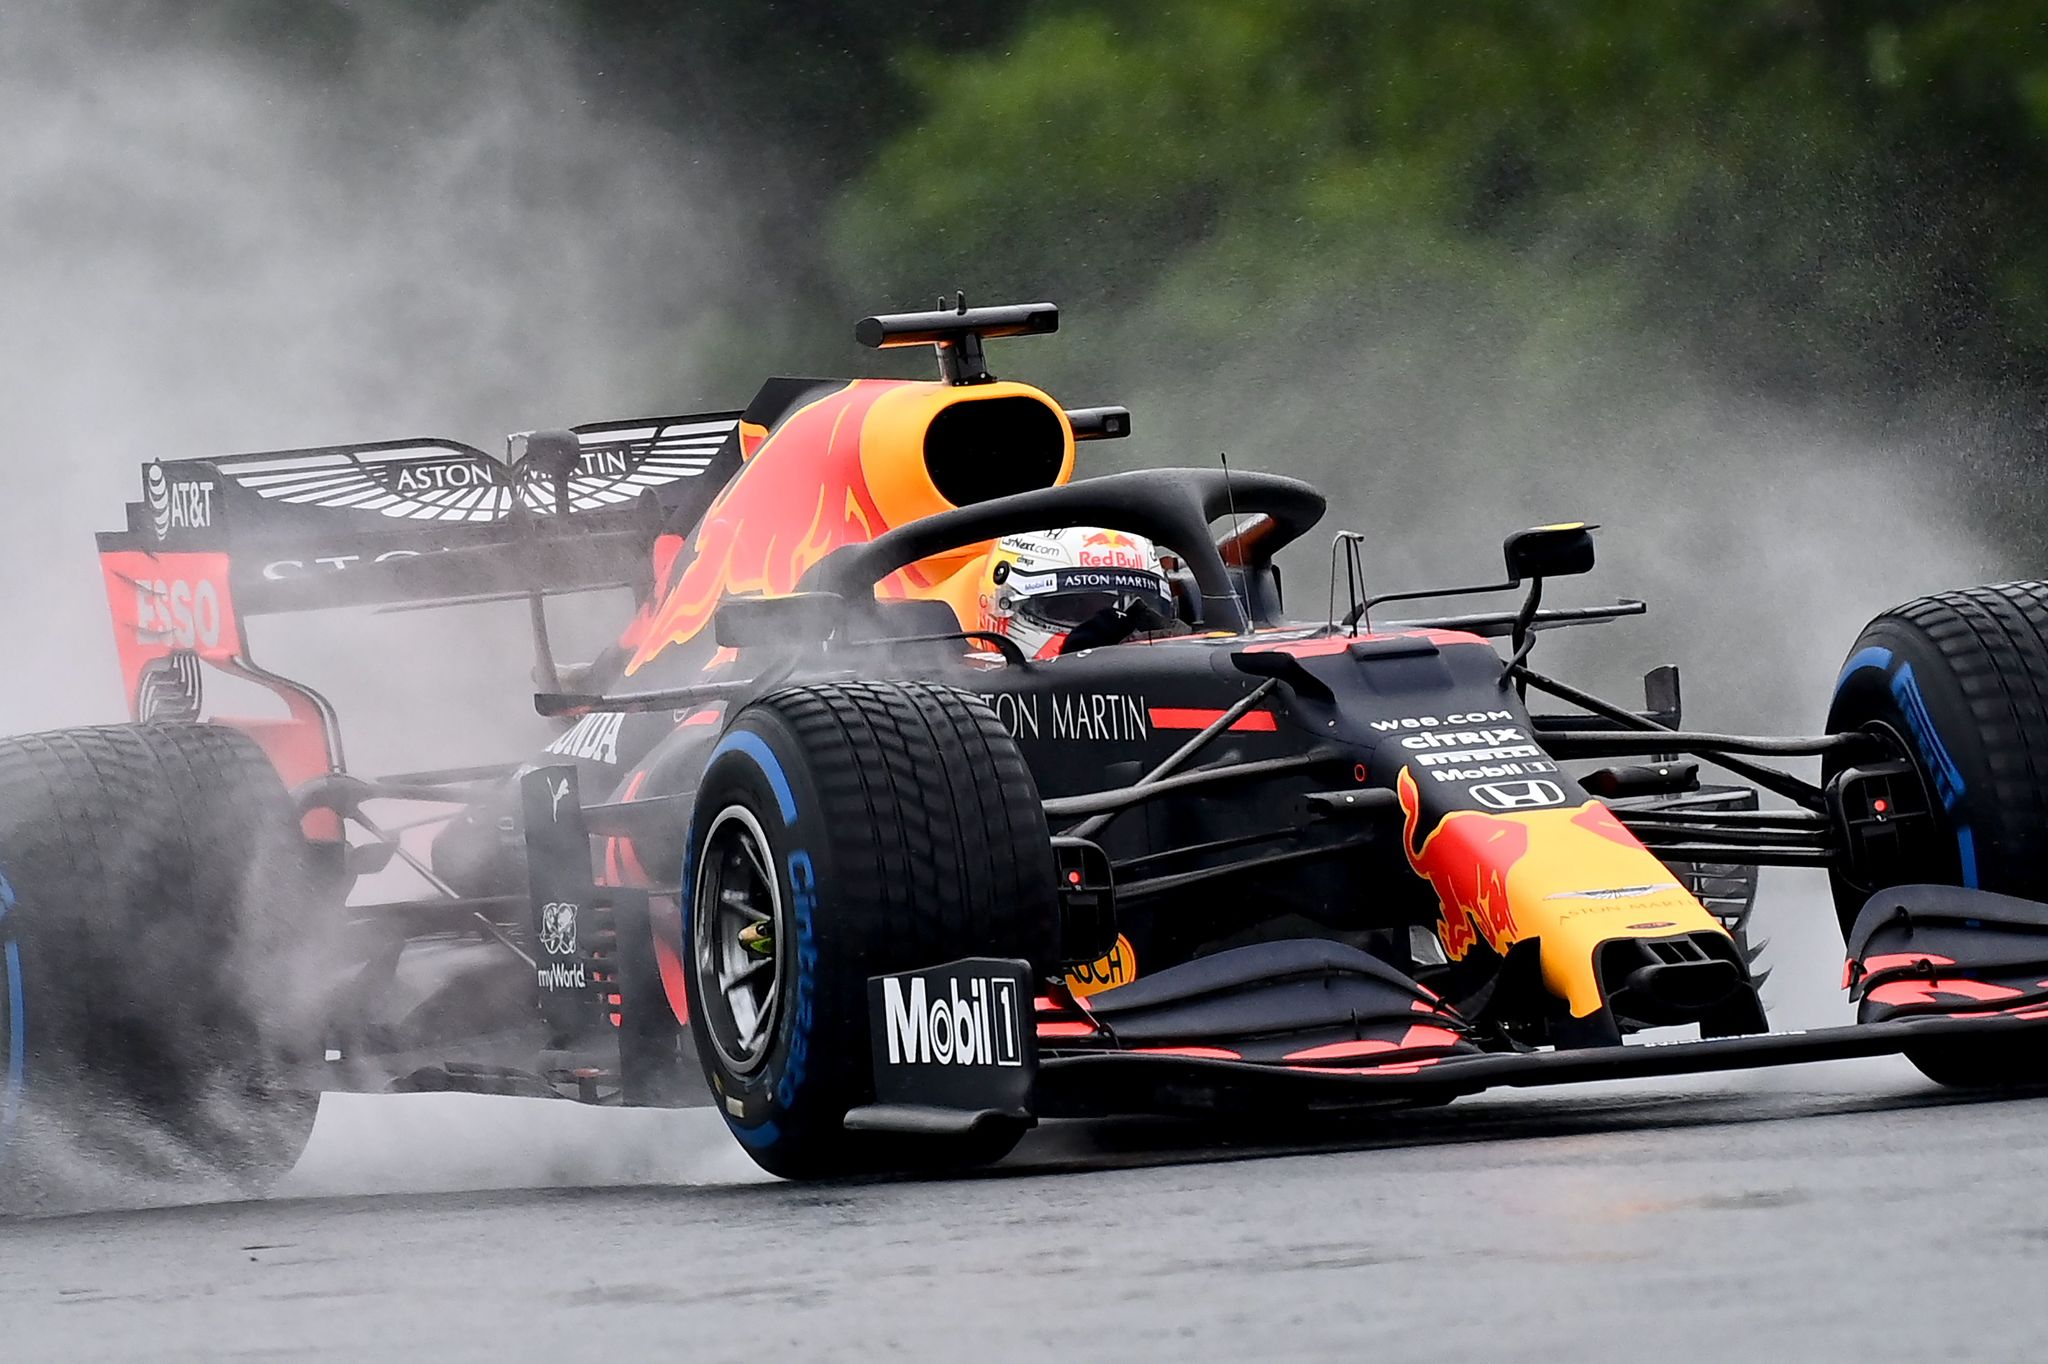 Red Bulls Dutch driver Max lt;HIT gt;Verstappen lt;/HIT gt; steers his car during the second practice session for the Formula One Hungarian Grand Prix at the Hungaroring circuit in Mogyorod near Budapest, Hungary, on July 17, 2020. (Photo by Joe Klamar / various sources / AFP)